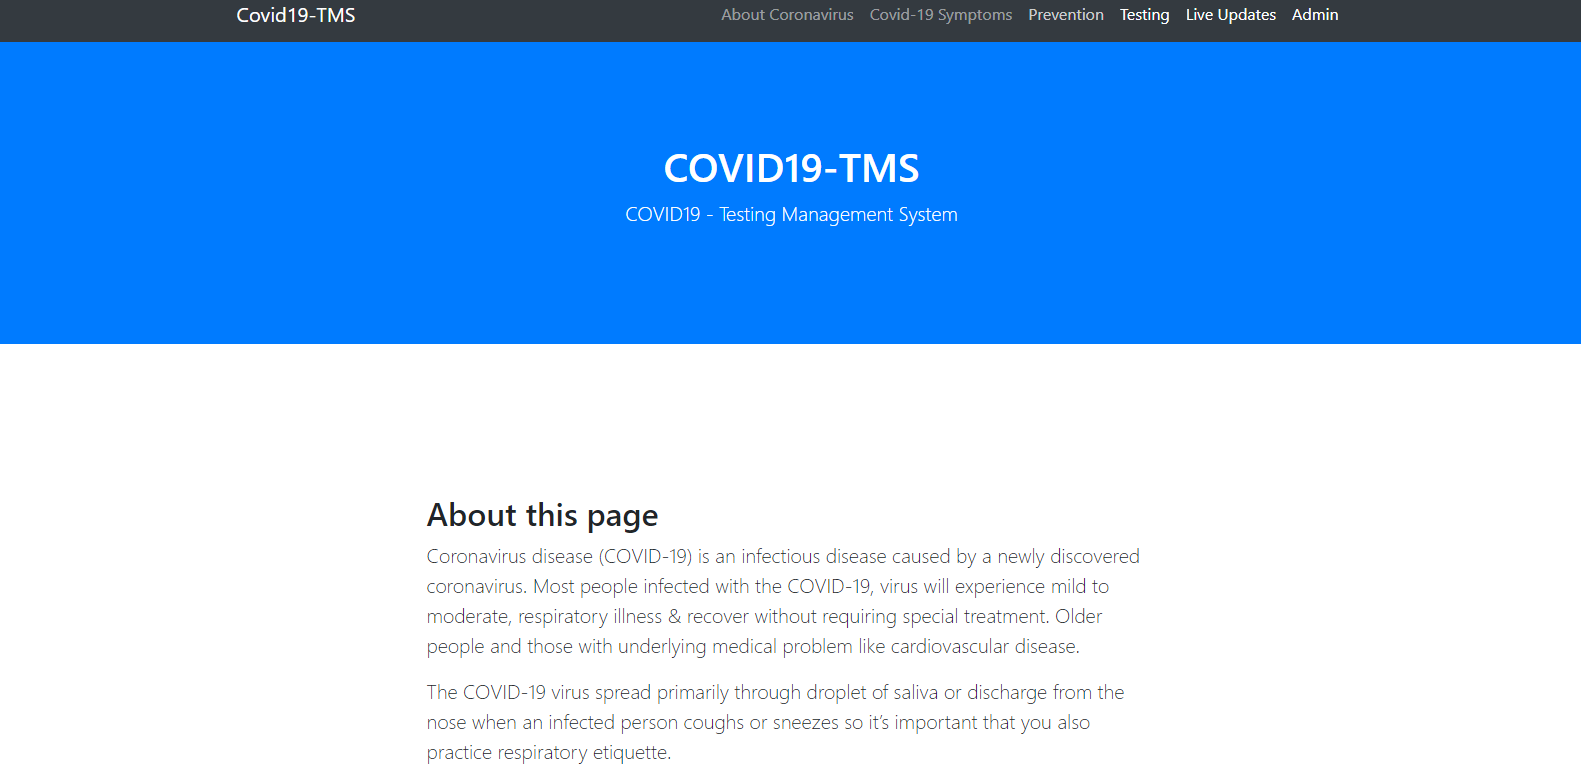 COVID 19 Testing Management System (CTMS)